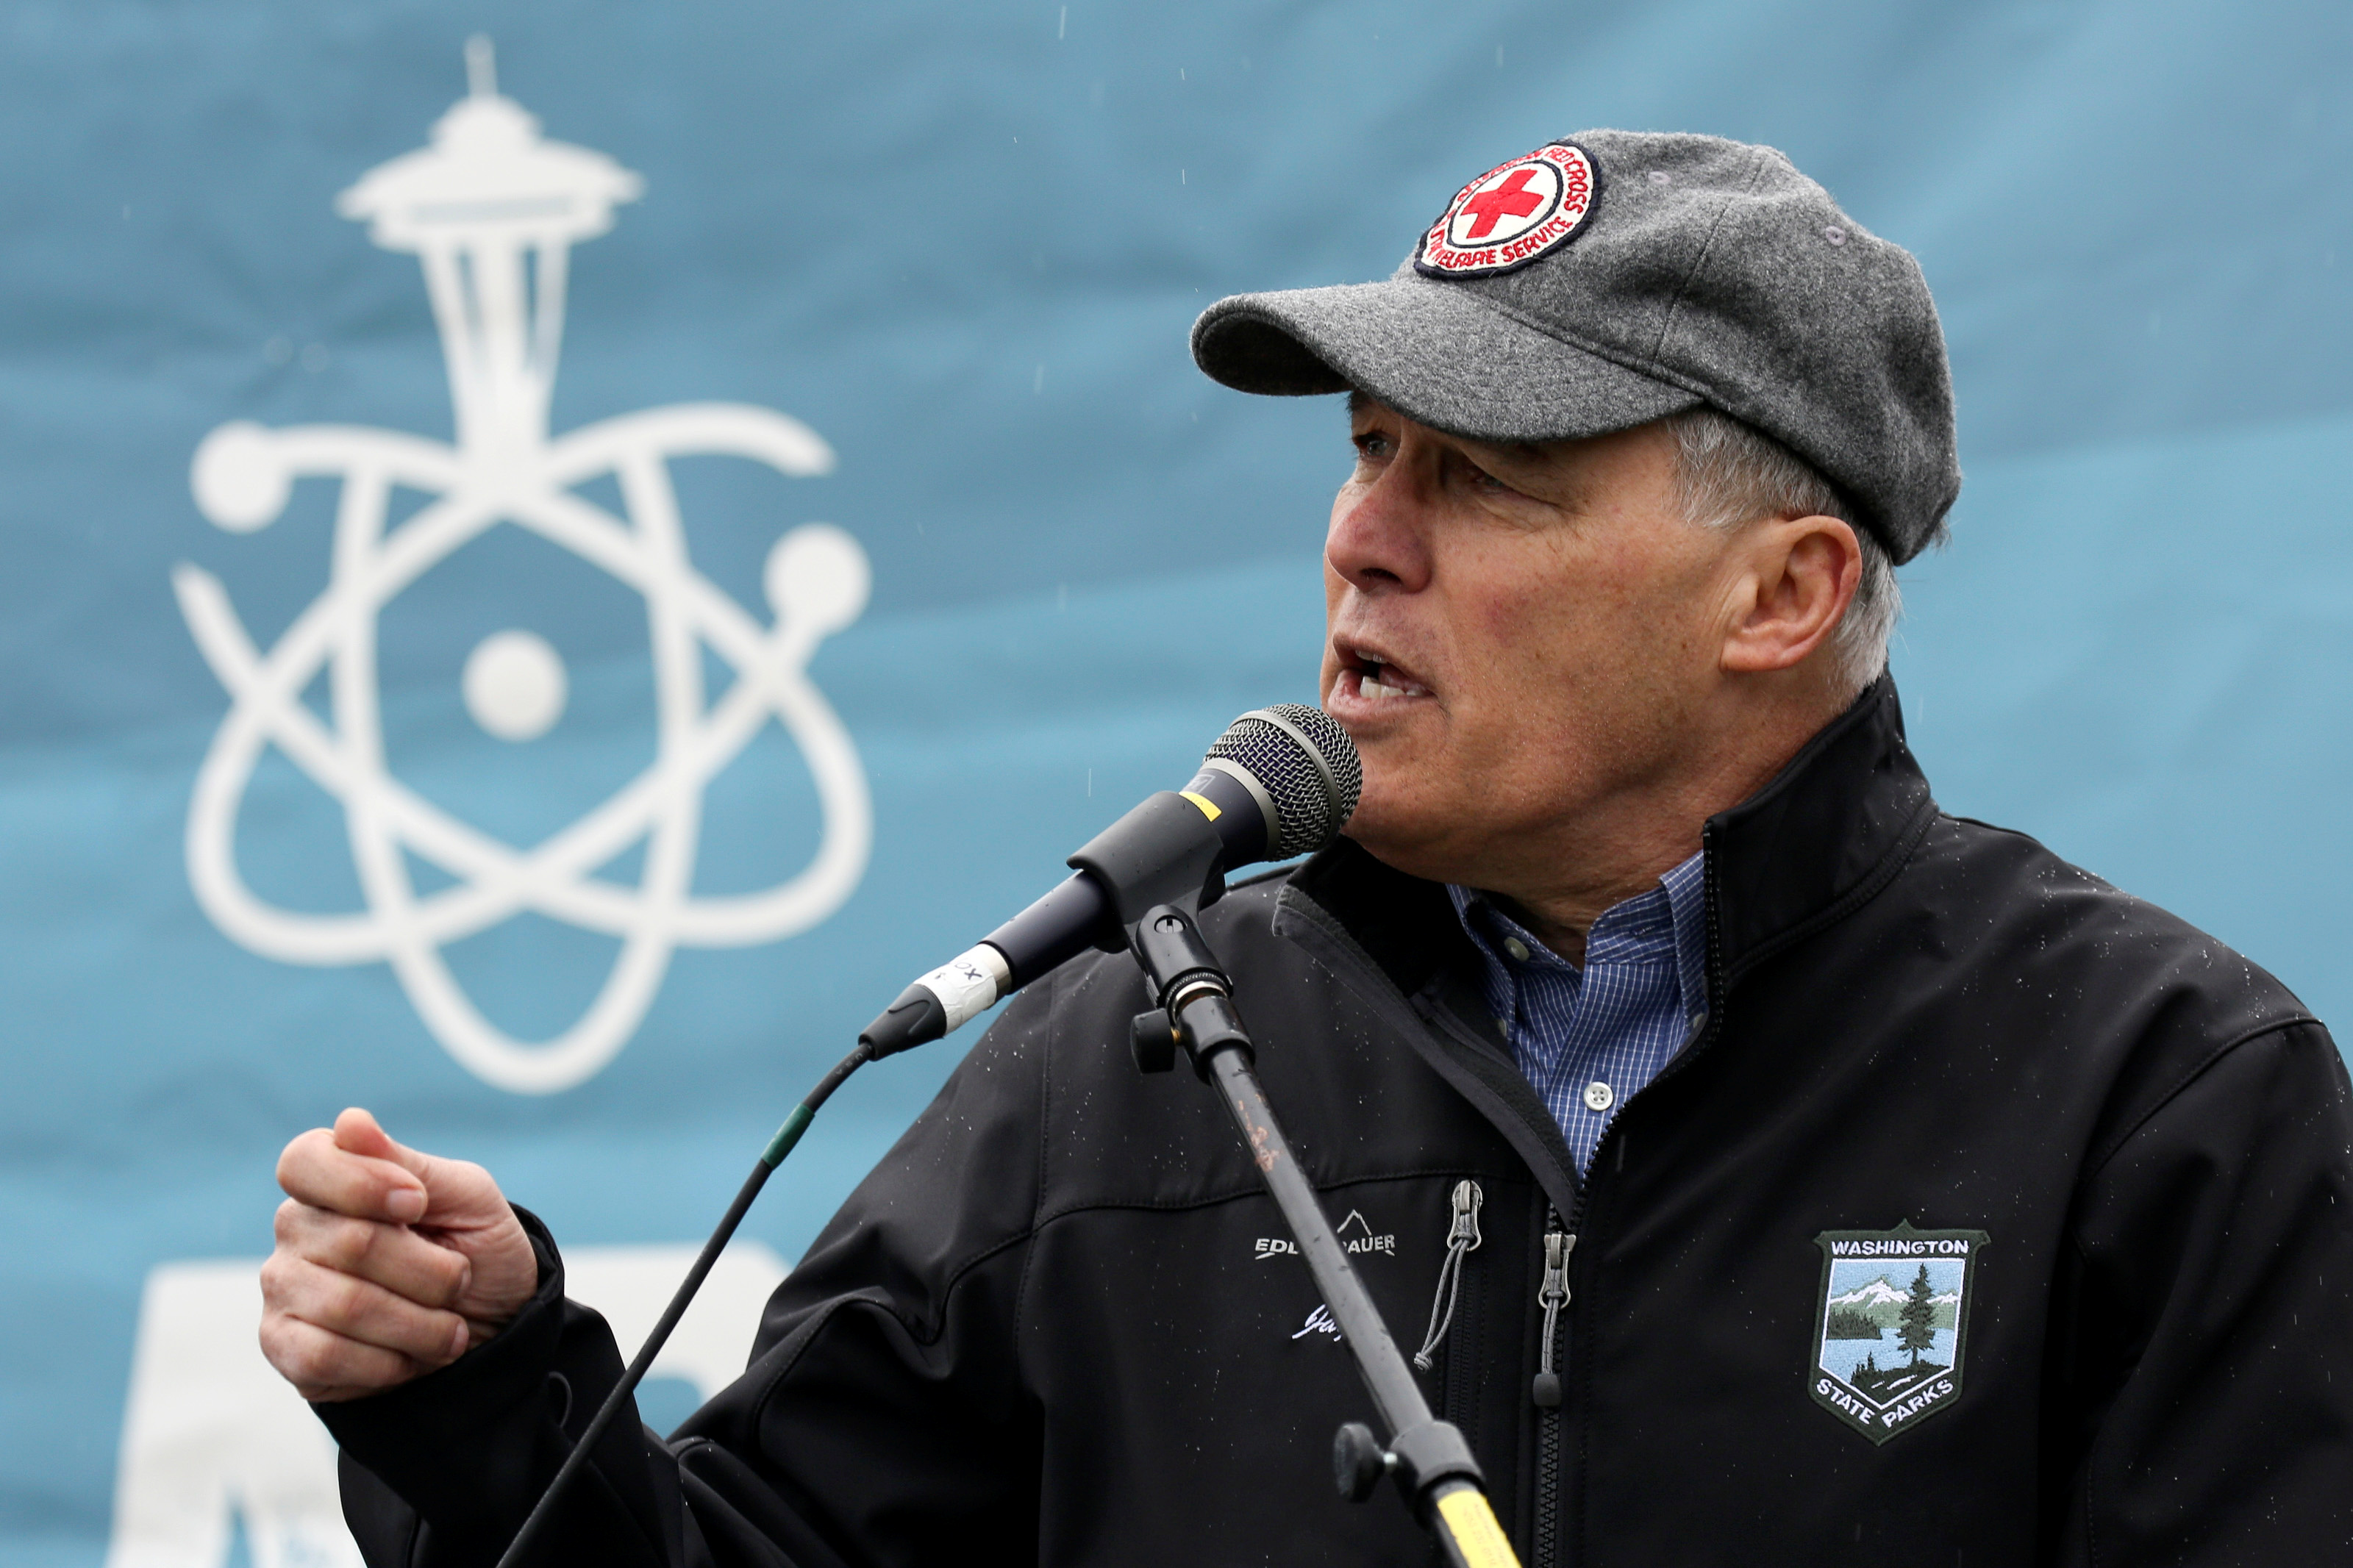 Washington Governor Jay Inslee speaks during a rally at the beginning of the March For Science in Seattle, Washington